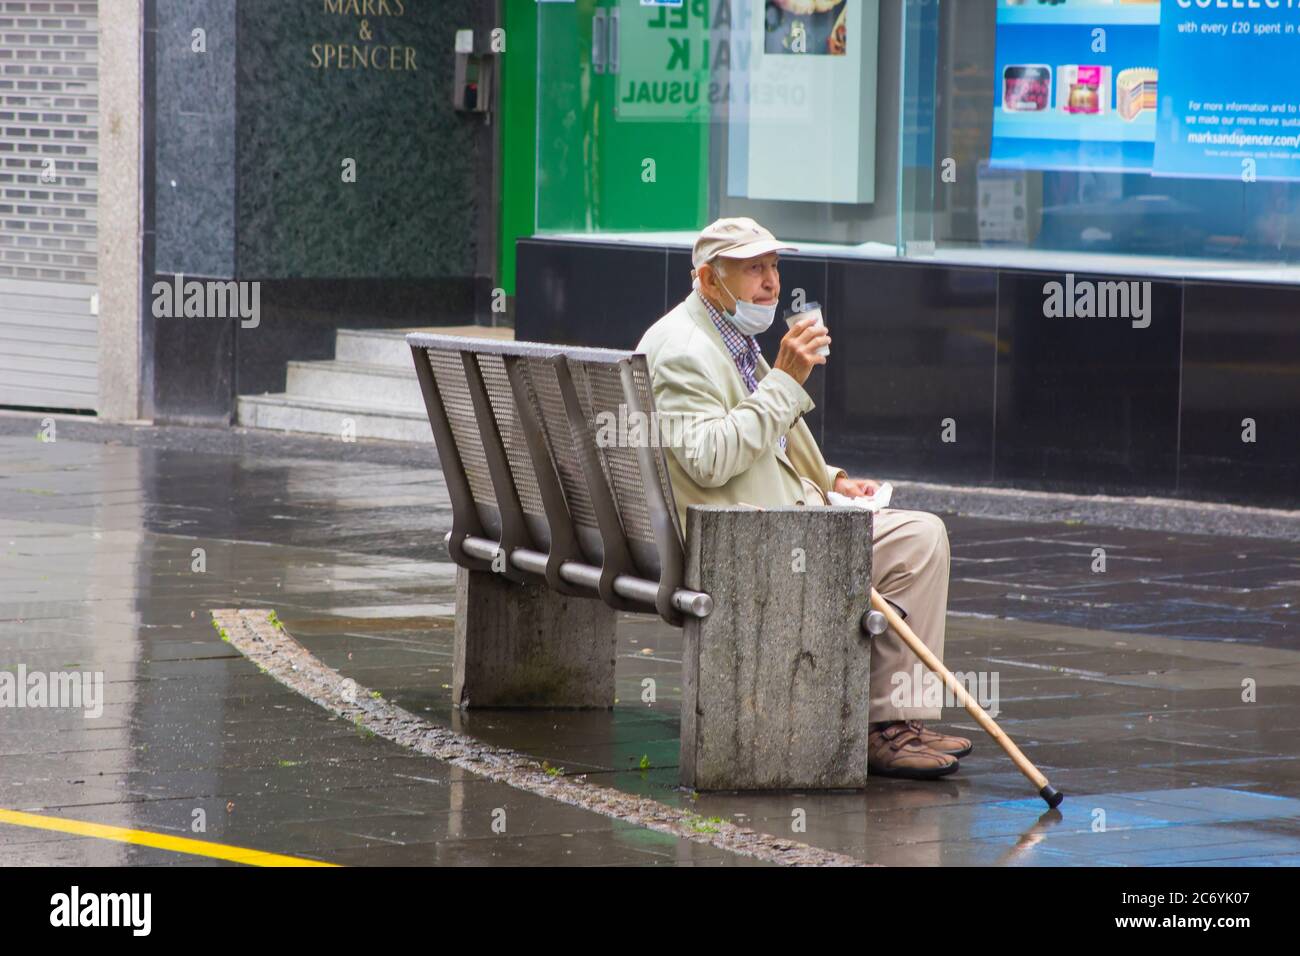 8 July 2020 An elderly gentleman with a face mask relaxes with a cup of hot coffe outside the Marks and Spencer store on Fargate in Sheffield City Cen Stock Photo